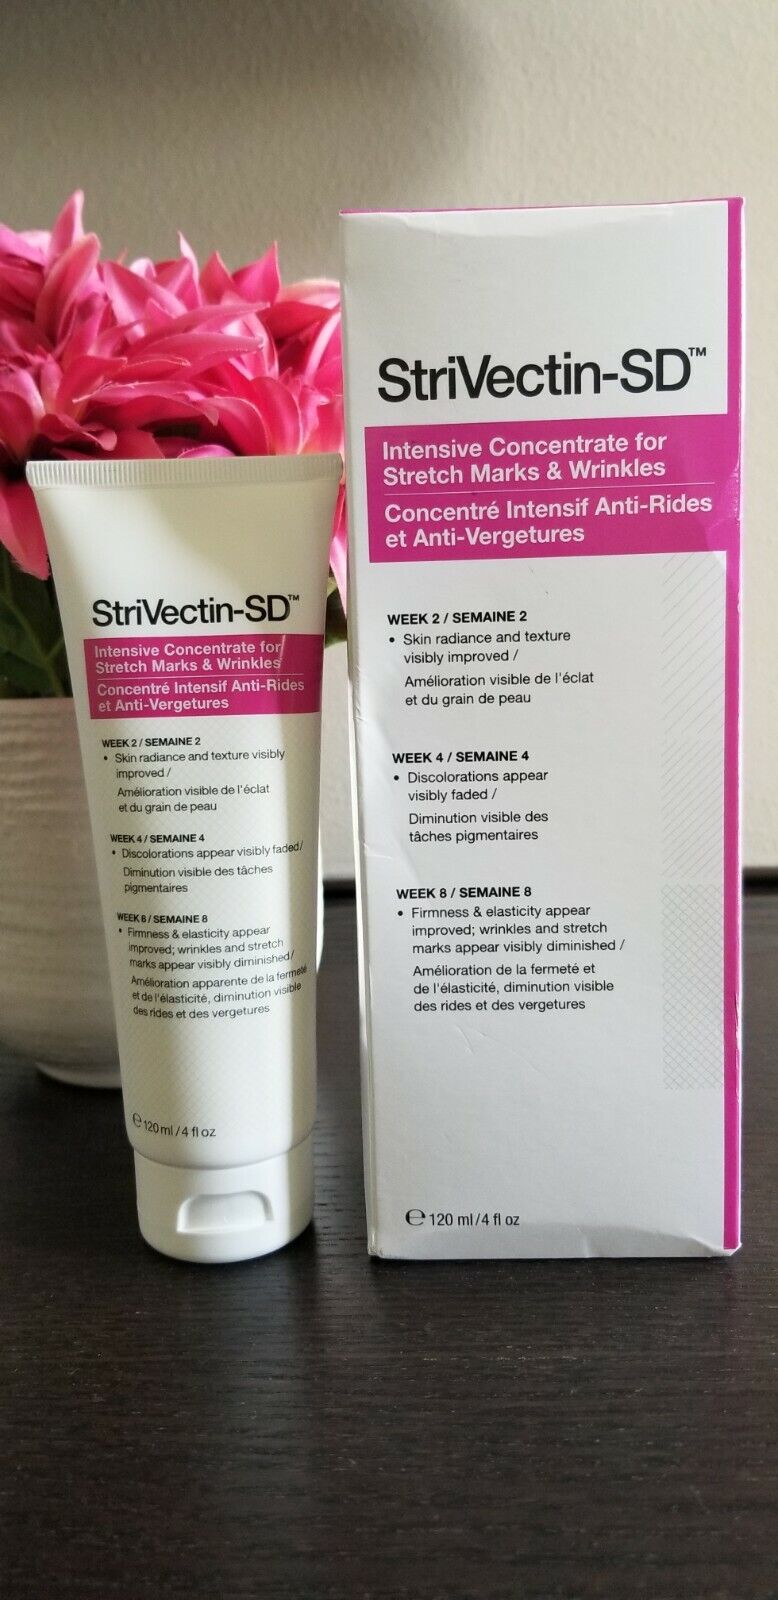 StriVectin-SD Intensive Concentrate for Stretch Marks & Wrinkles - 4 oz